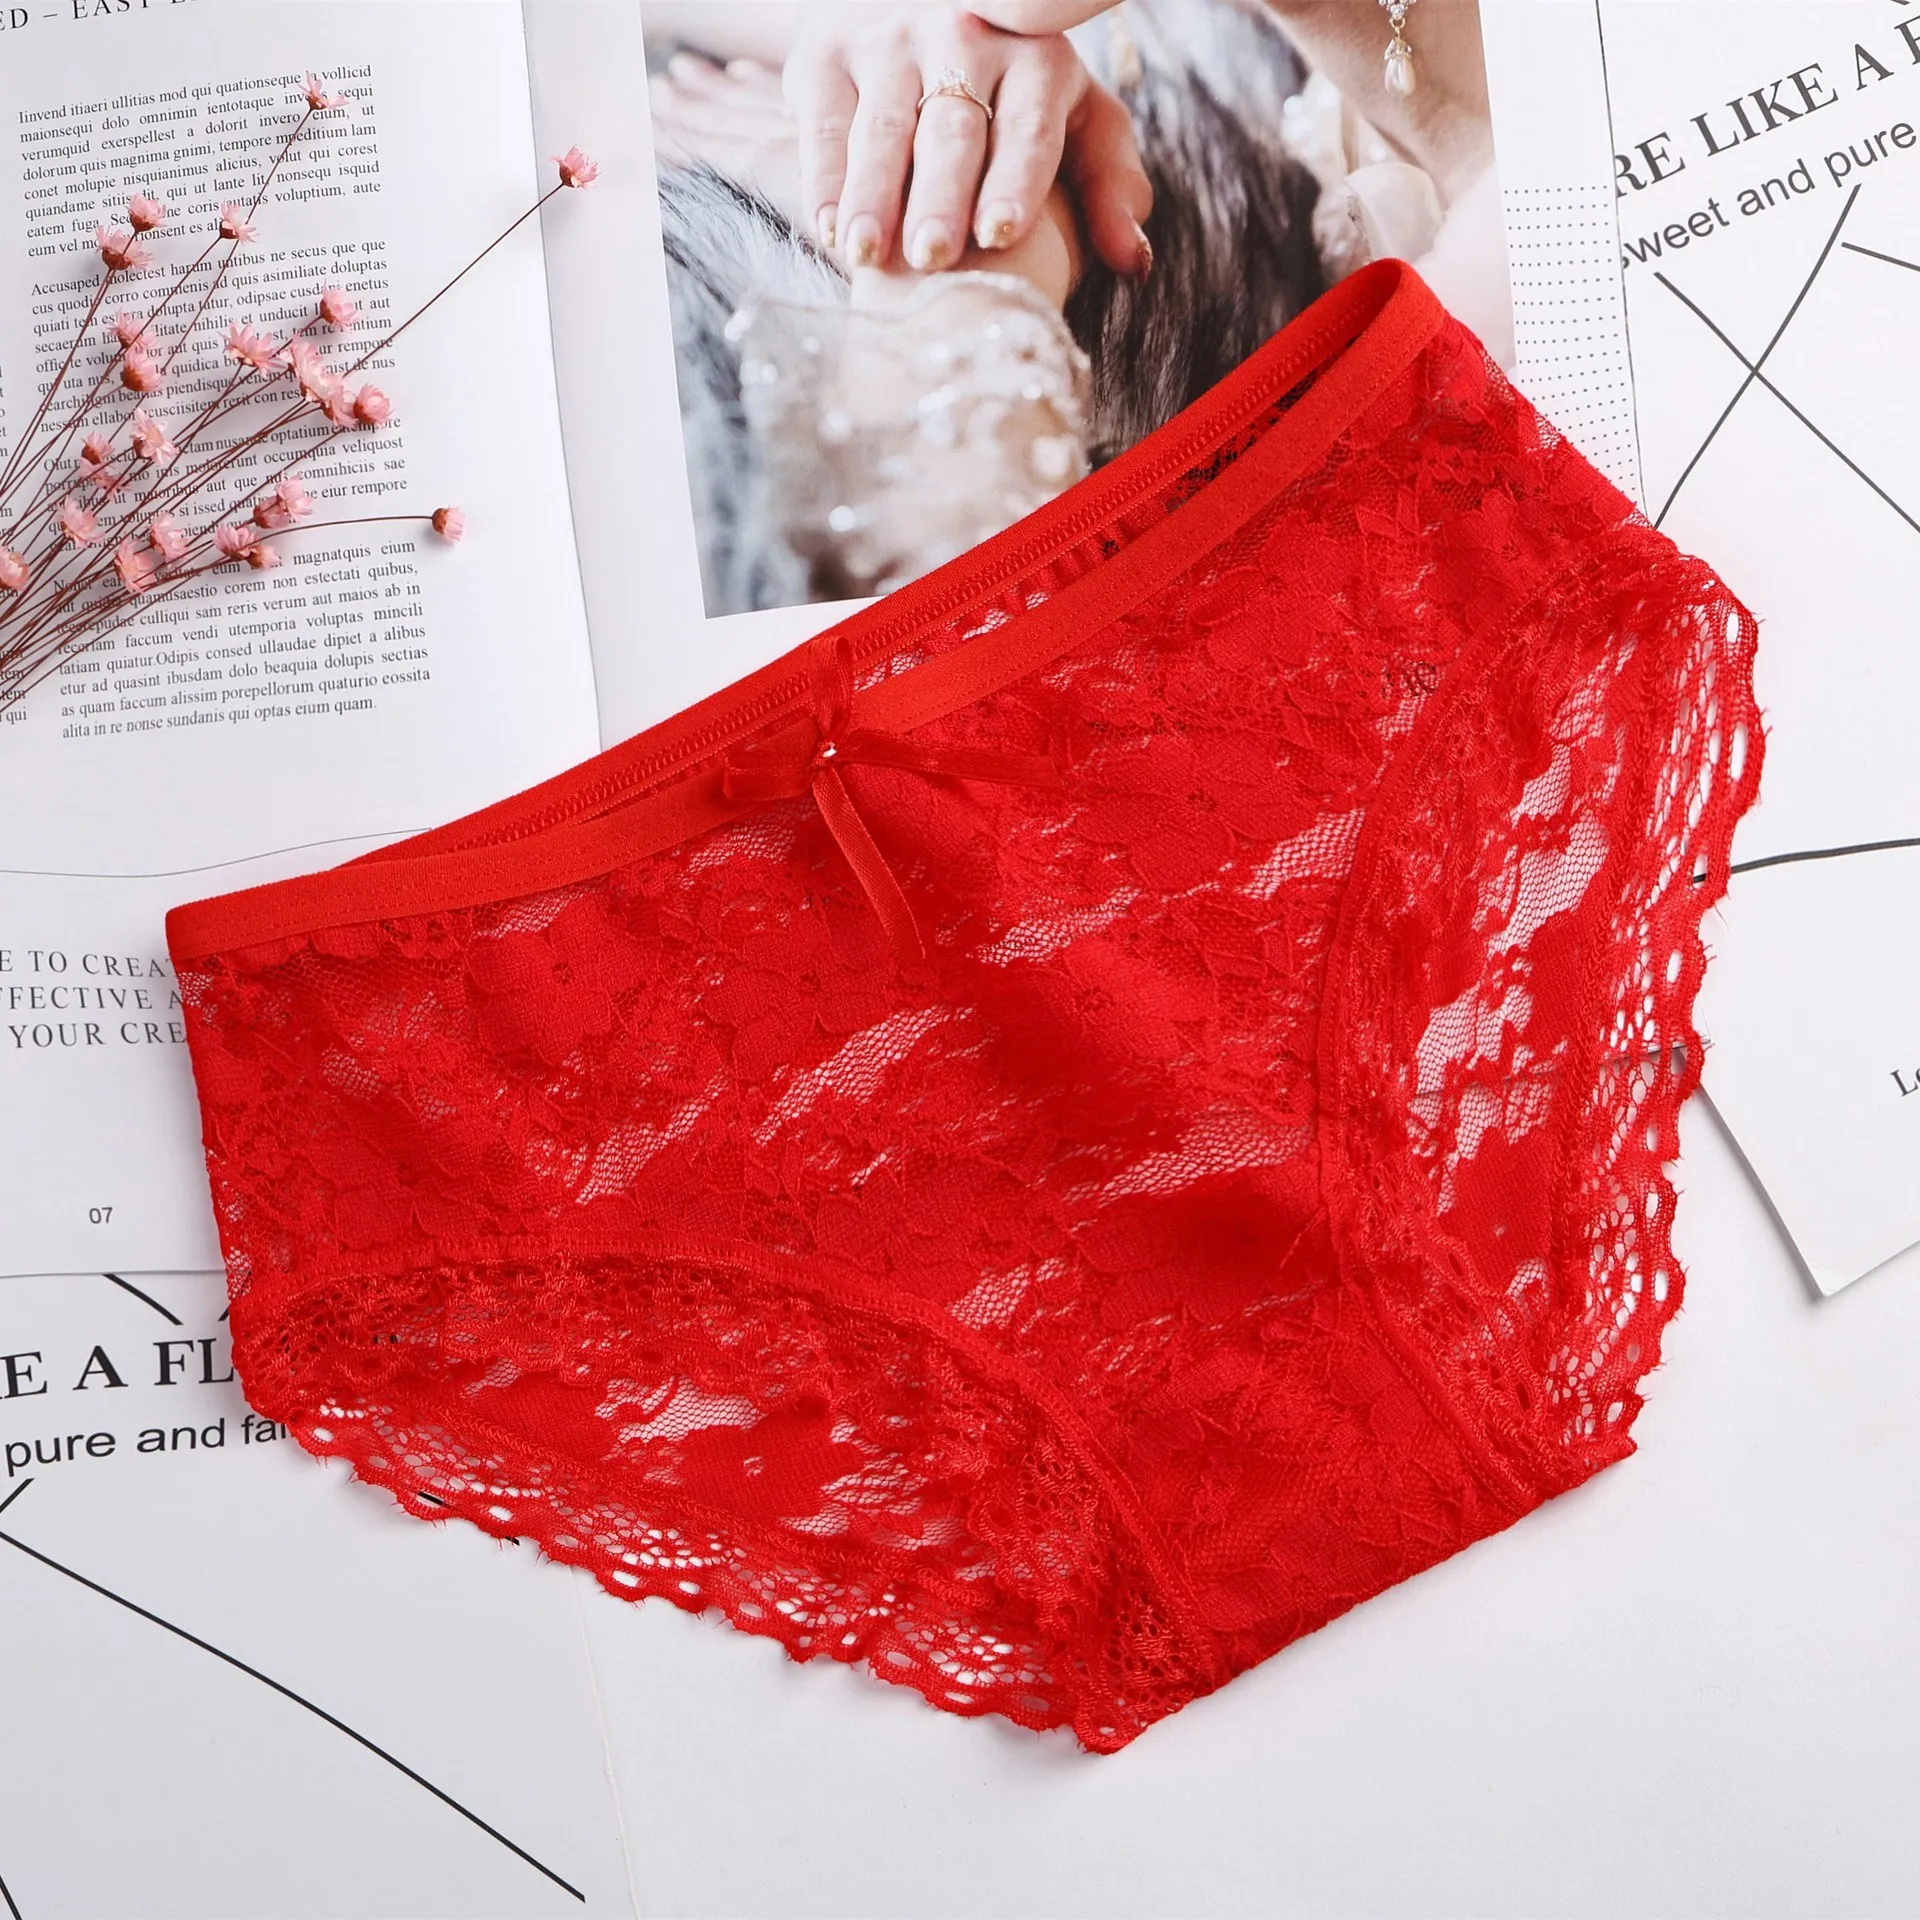 Briefs for Women Lace Cotton Sexy Lingerie Panties Girls Underwear Solid Color Bow Tie Underpants Ladies Panty Calcinha - Color: red